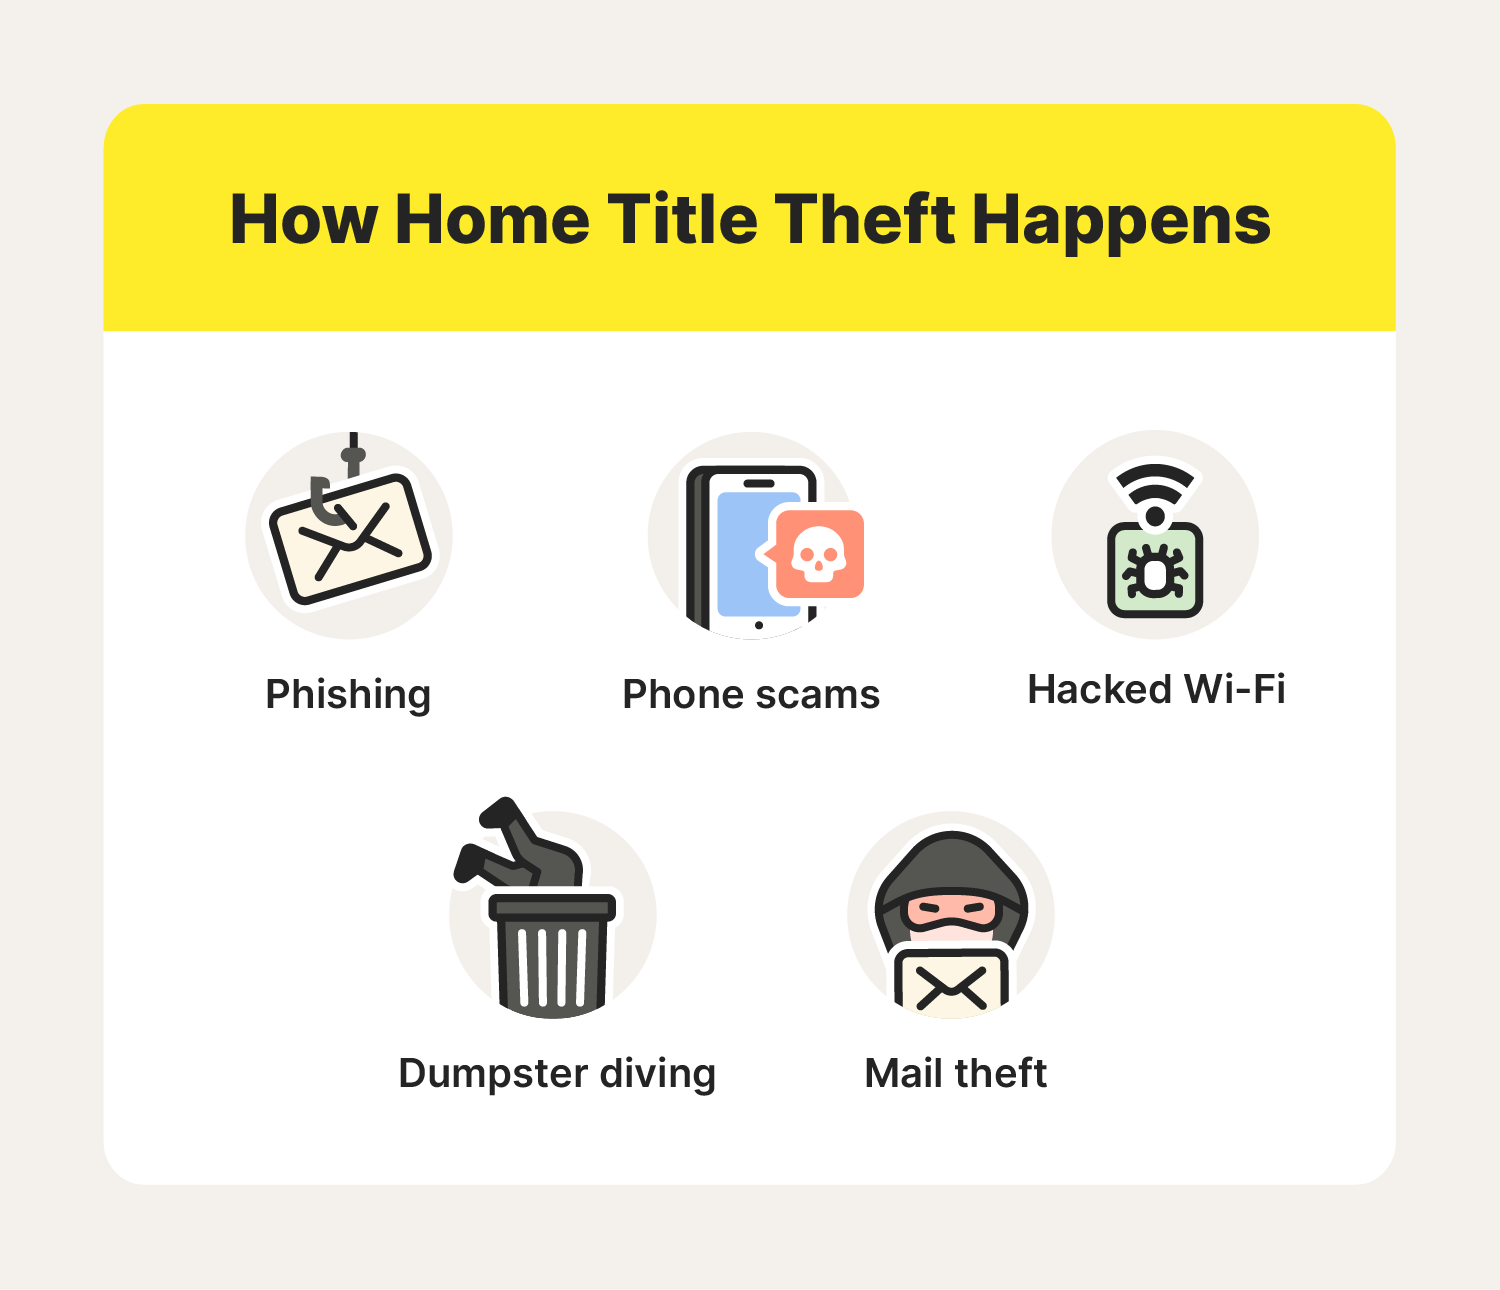 Five icons depict several ways home title theft occurs.